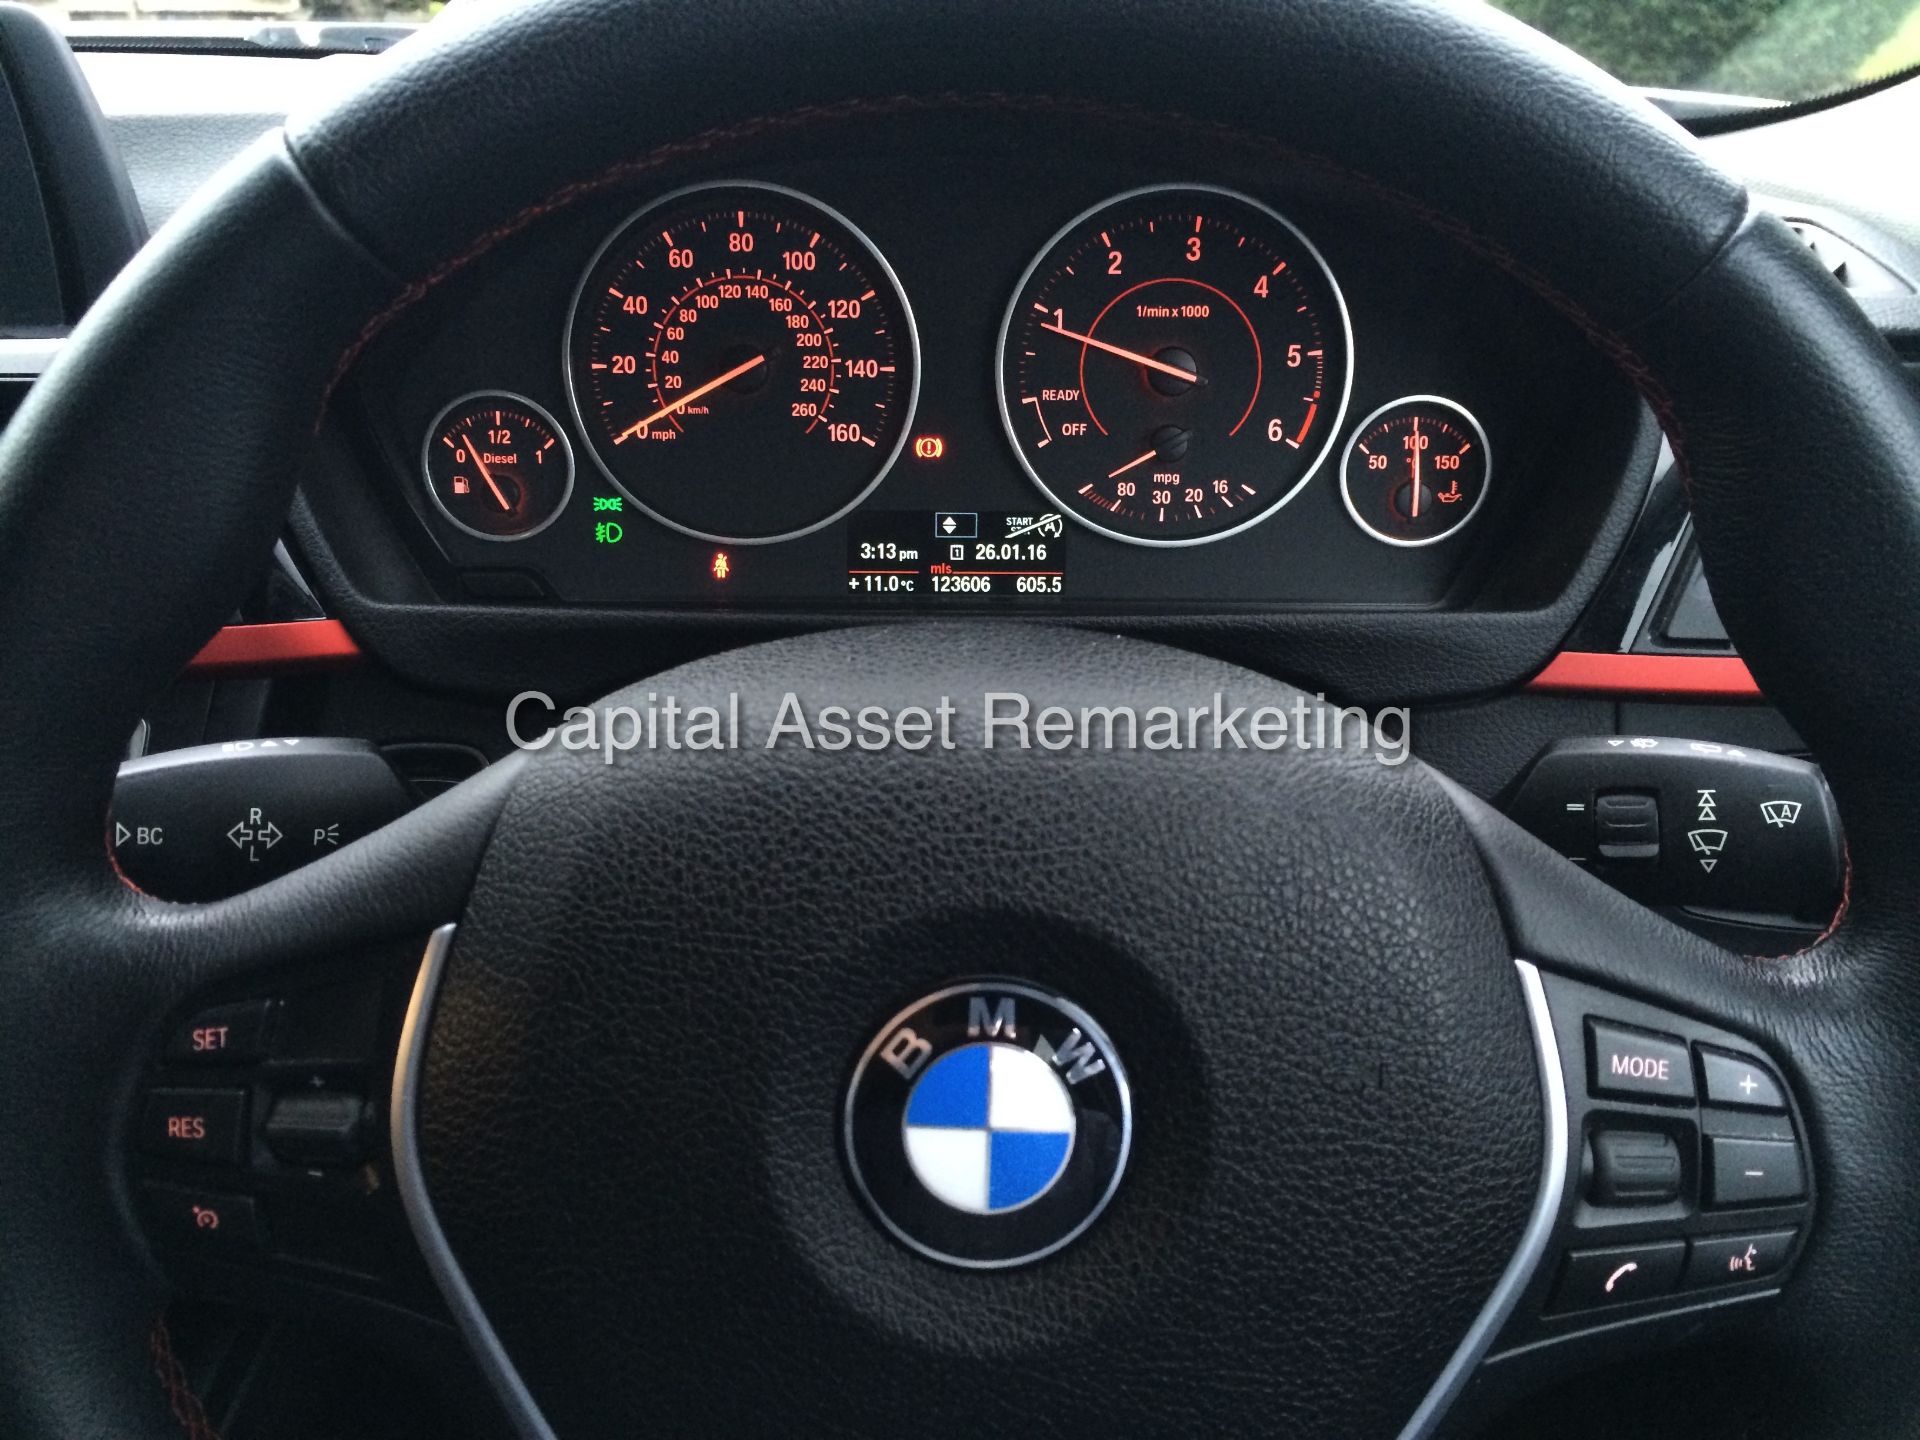 (On Sale) BMW 318D 'SPORT'  TOURING (2013 MODEL) NEW SHAPE - 1 OWNER FROM NEW - MASSIVE SPEC!! - Image 20 of 24